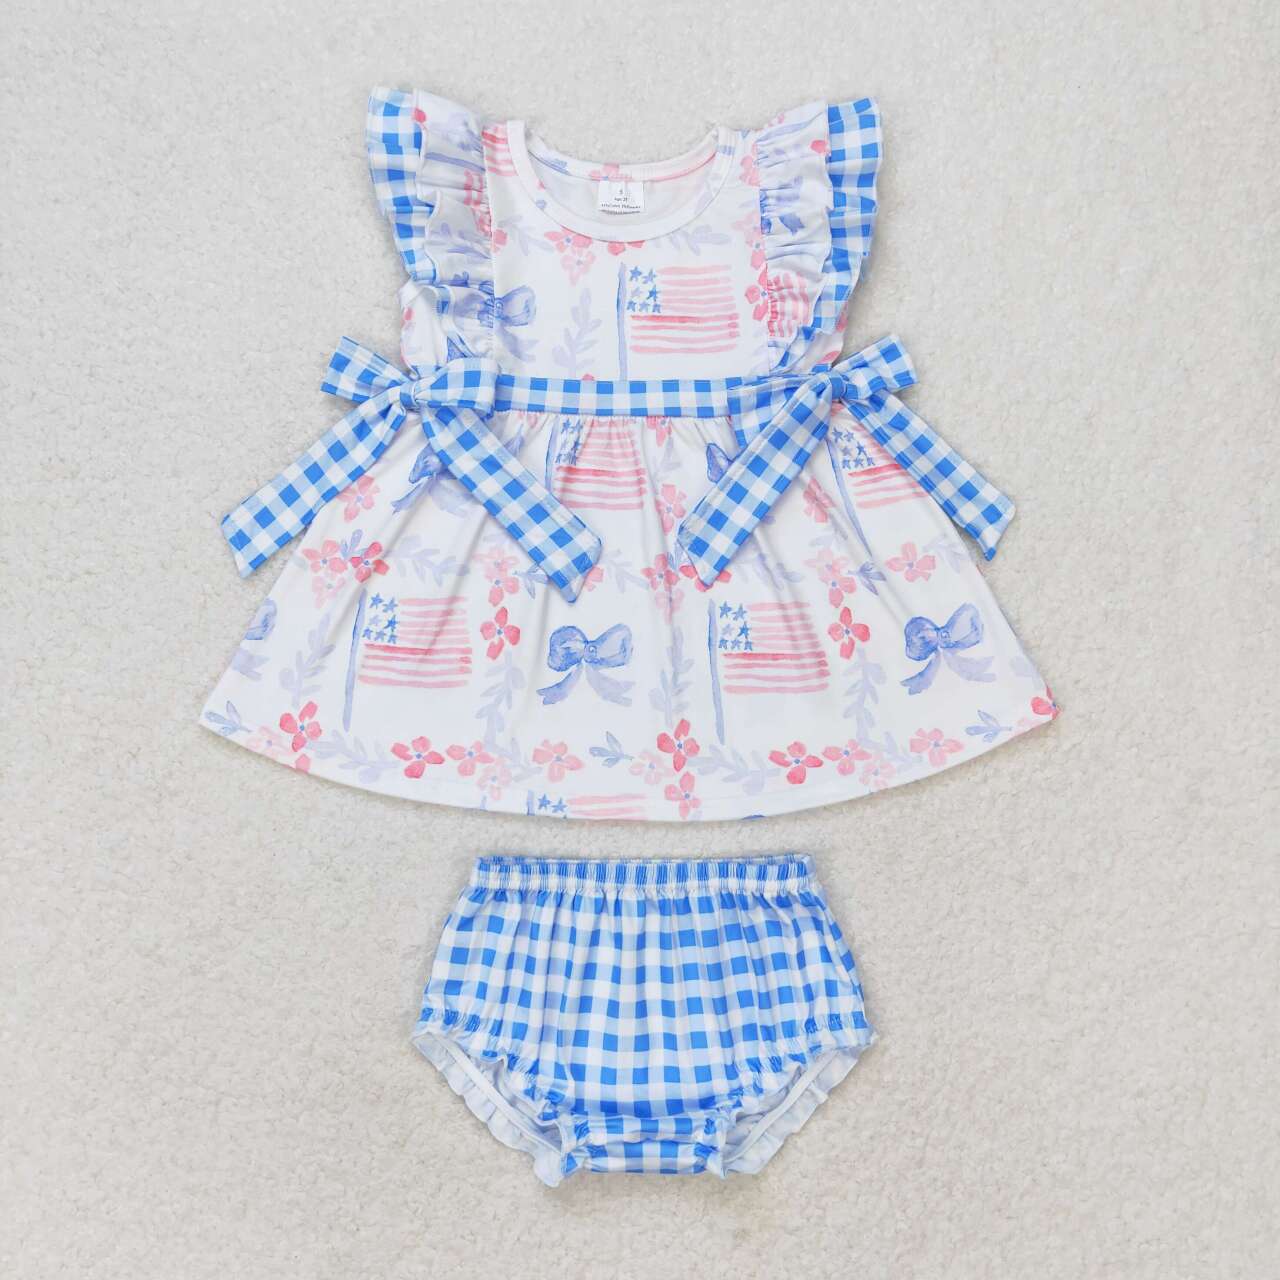 GBO0363 Blue Bows Flags Tunic Top Plaid Shorts Baby Girls 4th of July Bummie Set